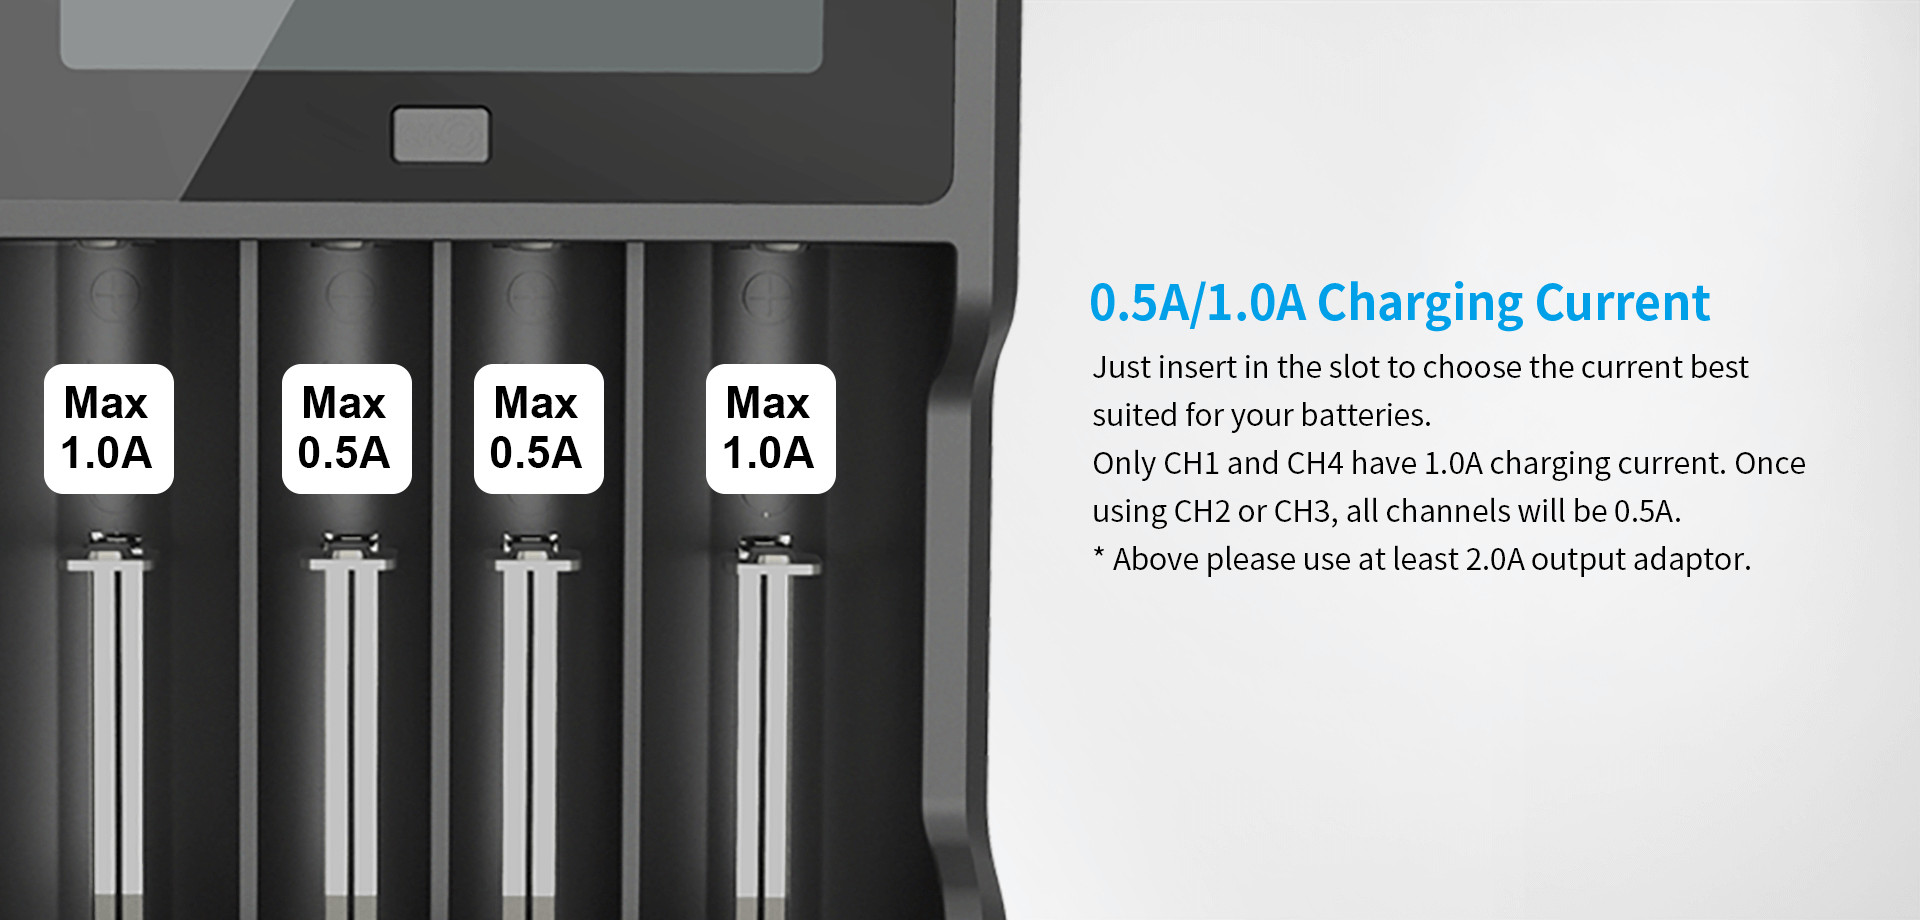 XTAR VC4 Charger | 0.5A/1.0A Charging Current